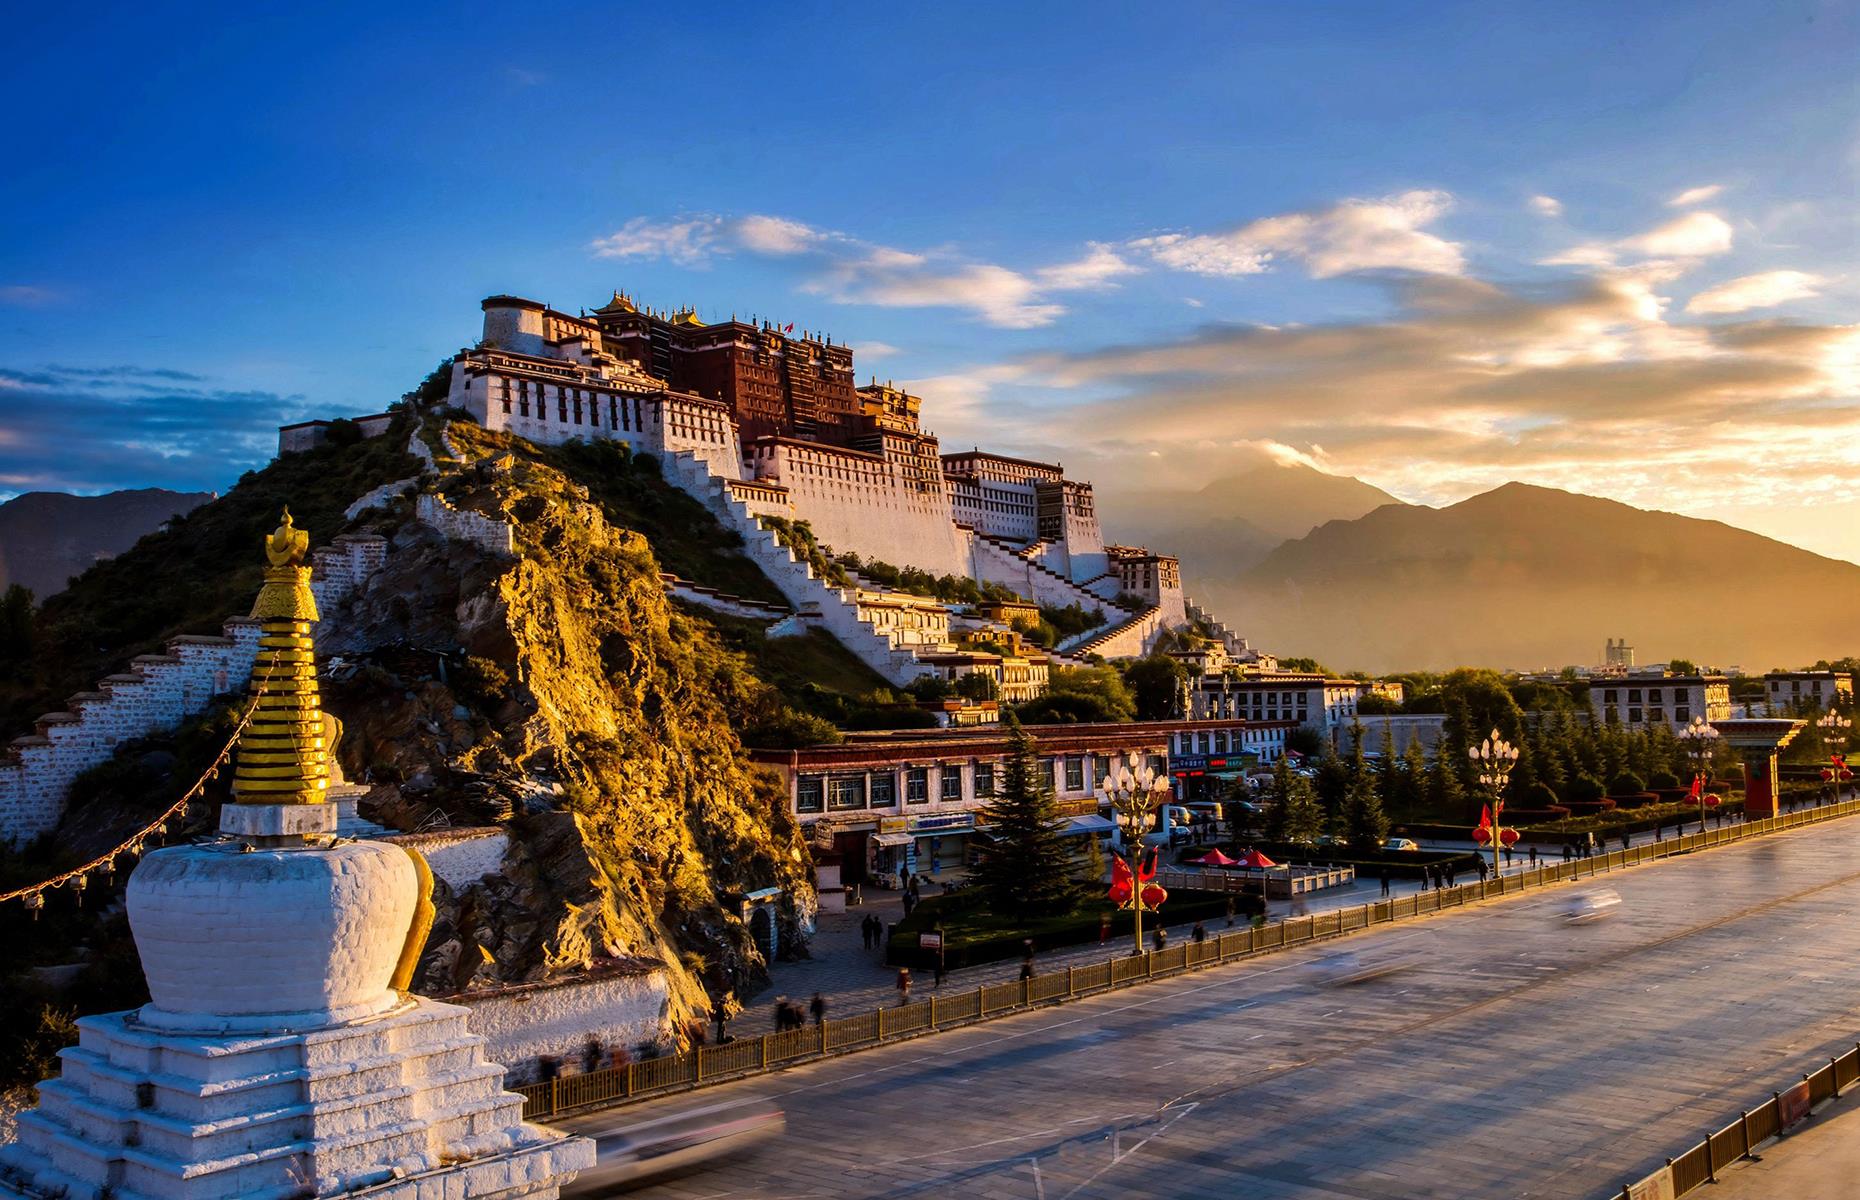 <p>The Holy City, the Place of the Gods, the center of Tibetan Buddhism – Lhasa has a lot to live up to. But it would be hard not to be moved by the first sight of the Potala Palace or the fervor of pilgrims walking the Barkhor circuit around the Jokhang temple in winding, incense-scented alleys. Perhaps it’s the altitude, but Lhasa seems to have something magical about it. These are <a href="https://www.loveexploring.com/galleries/101539/inside-the-worlds-most-luxurious-palaces">the world's most stunning palaces</a>.</p>